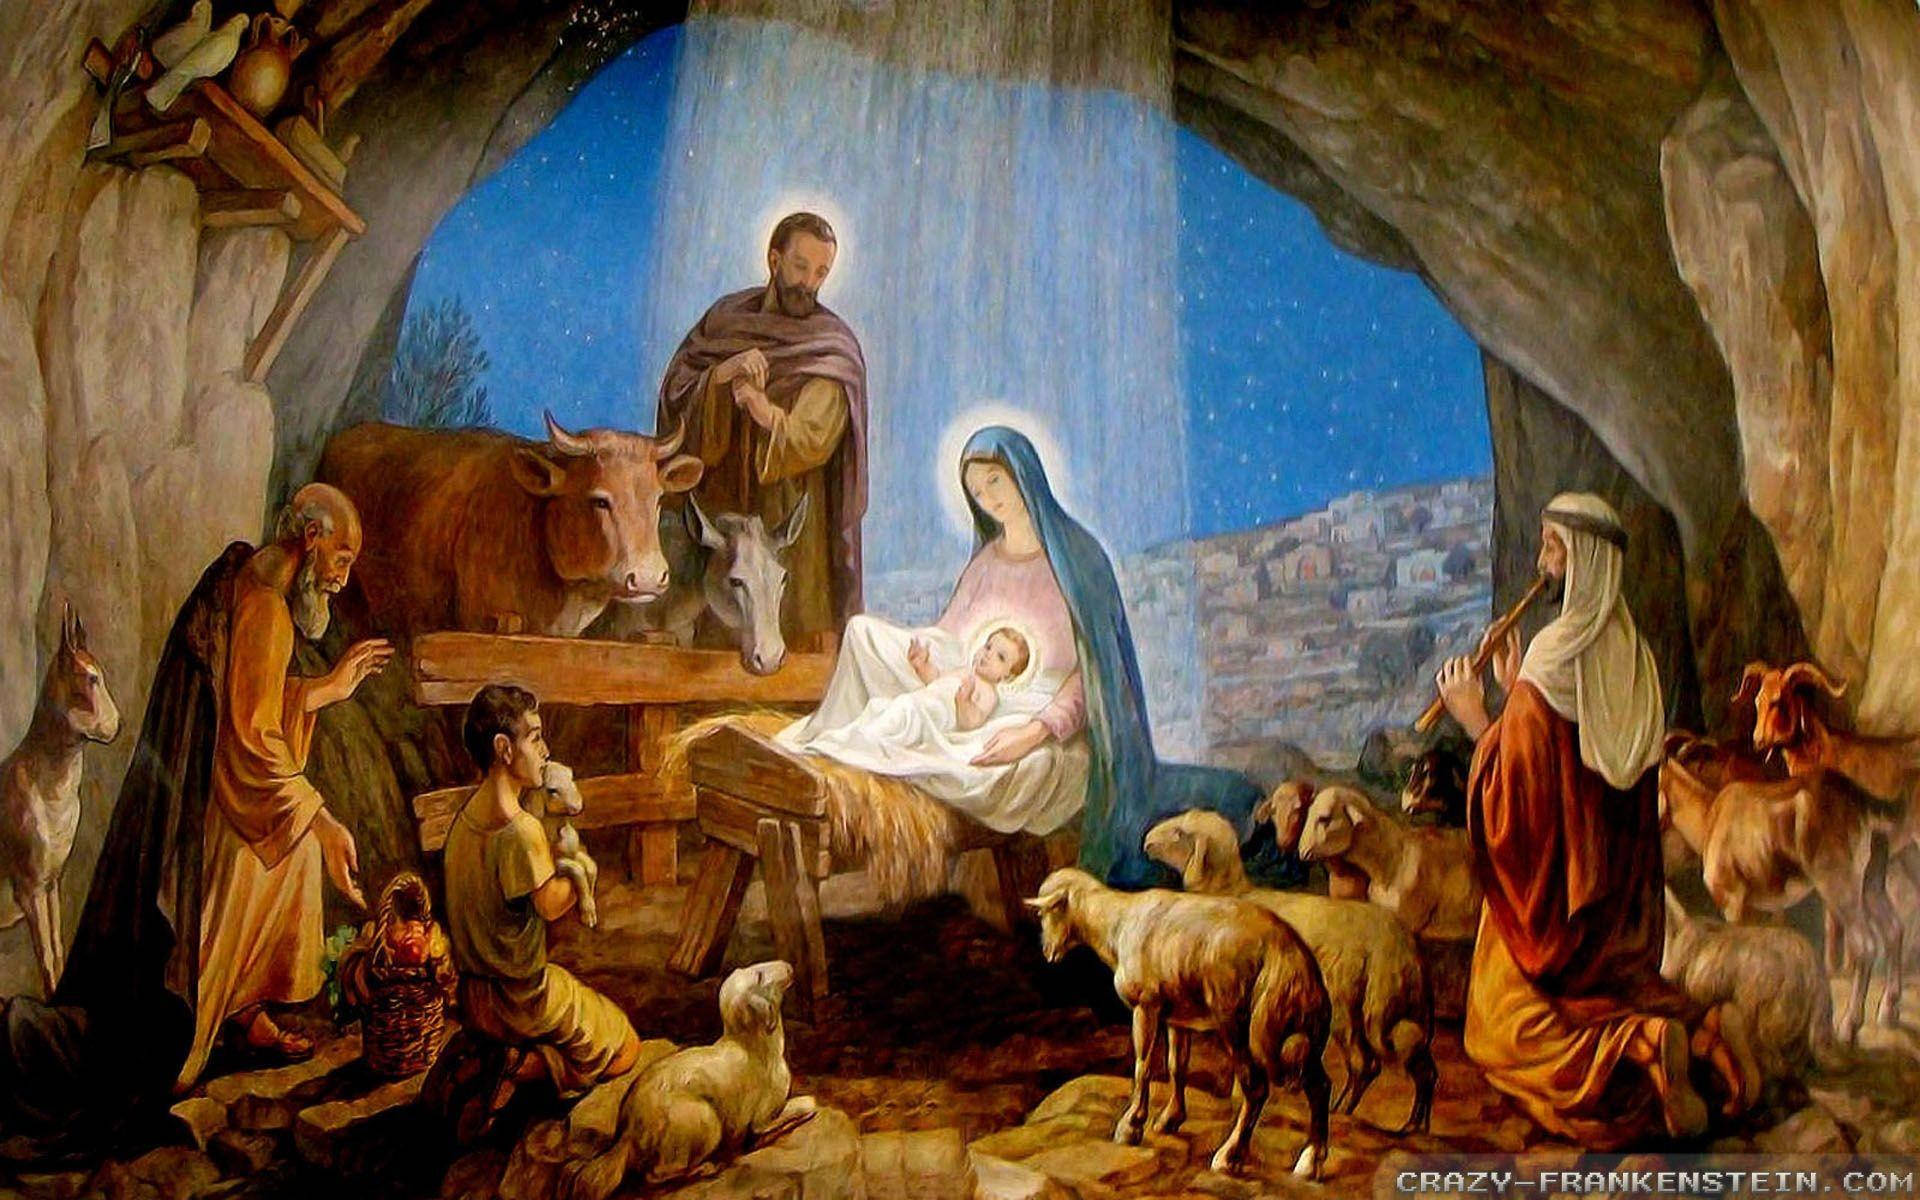 The Holy Family In The Stone Cave